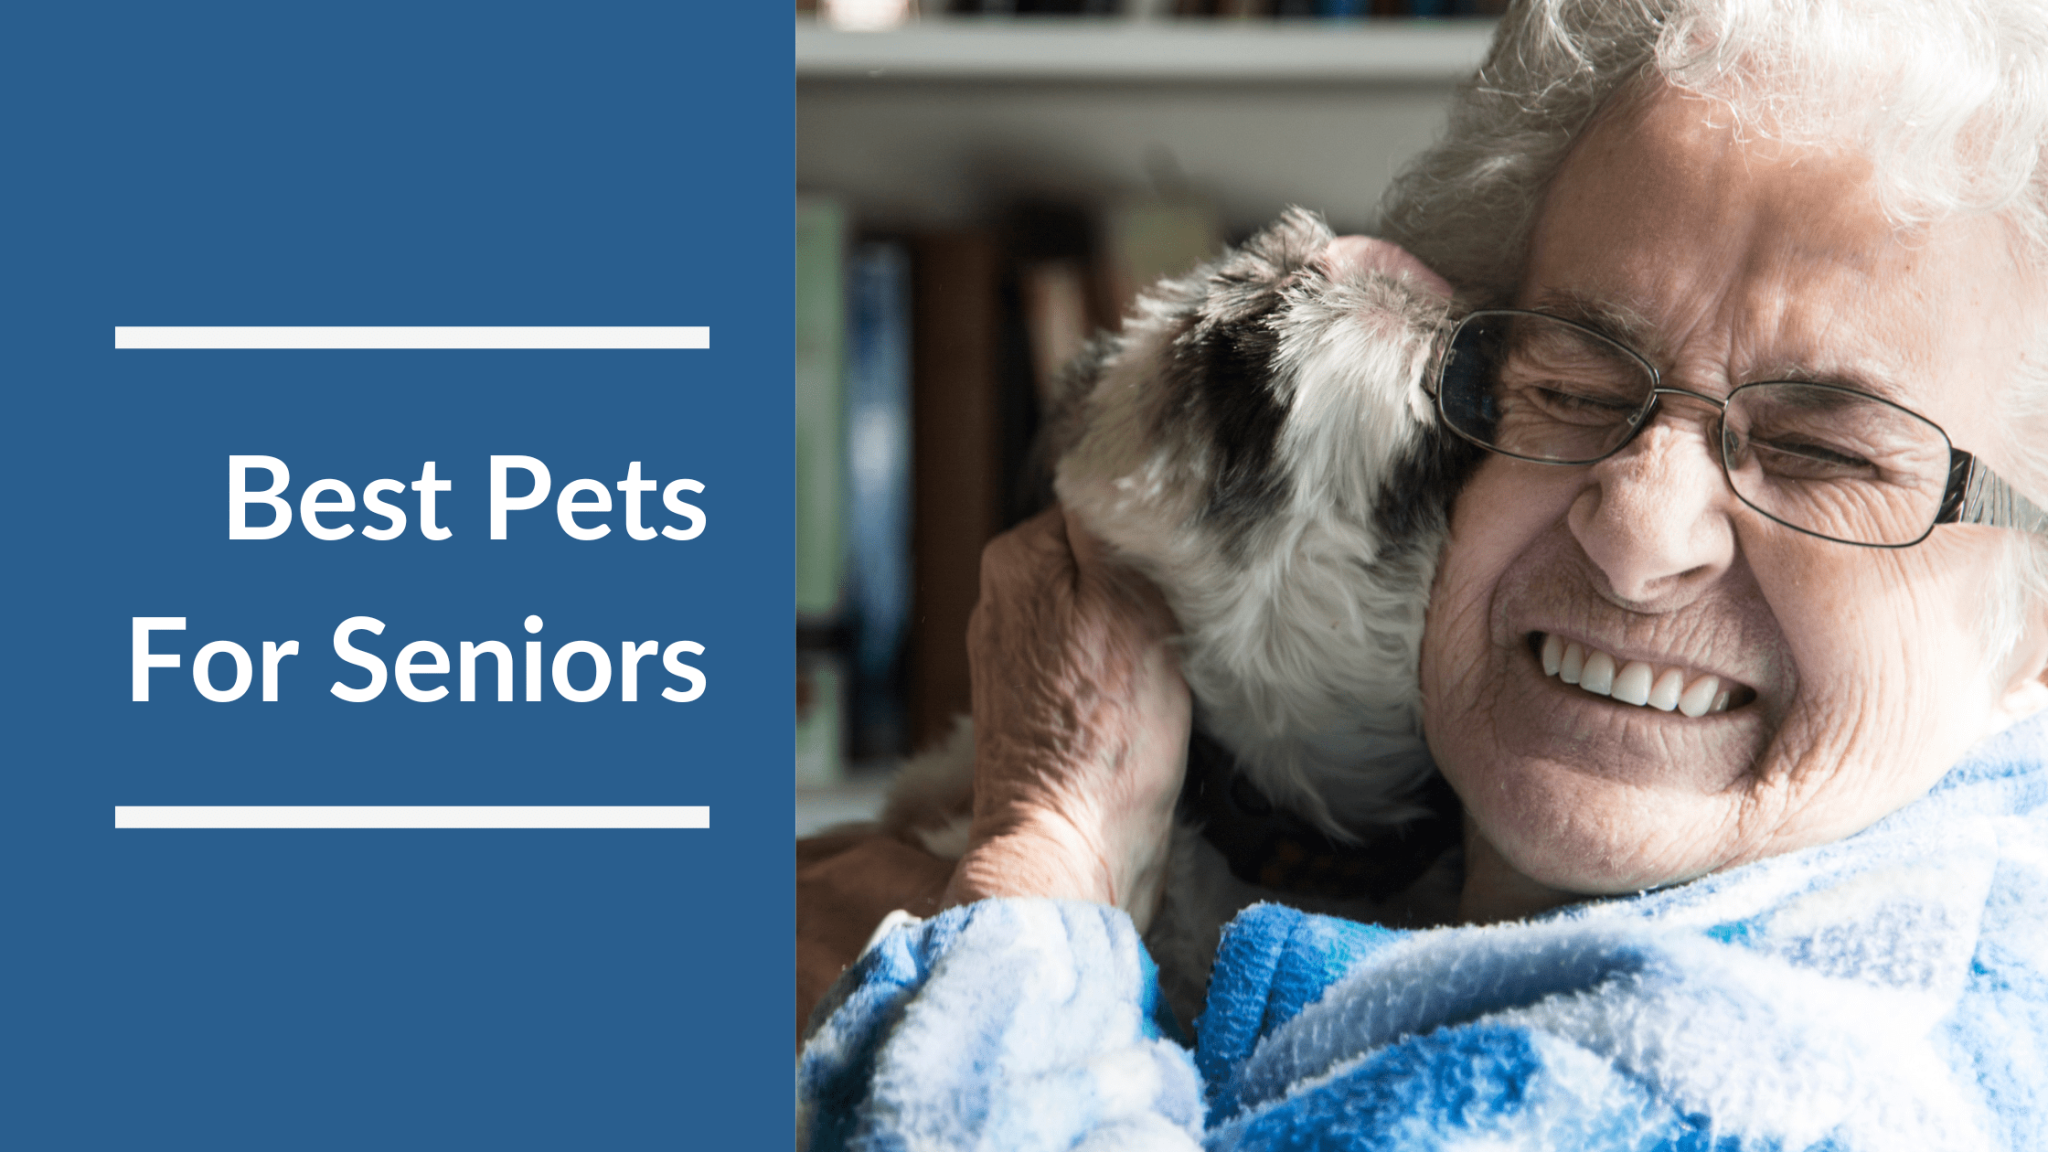 best-pets-for-seniors-10-companions-for-older-adults-meetcaregivers